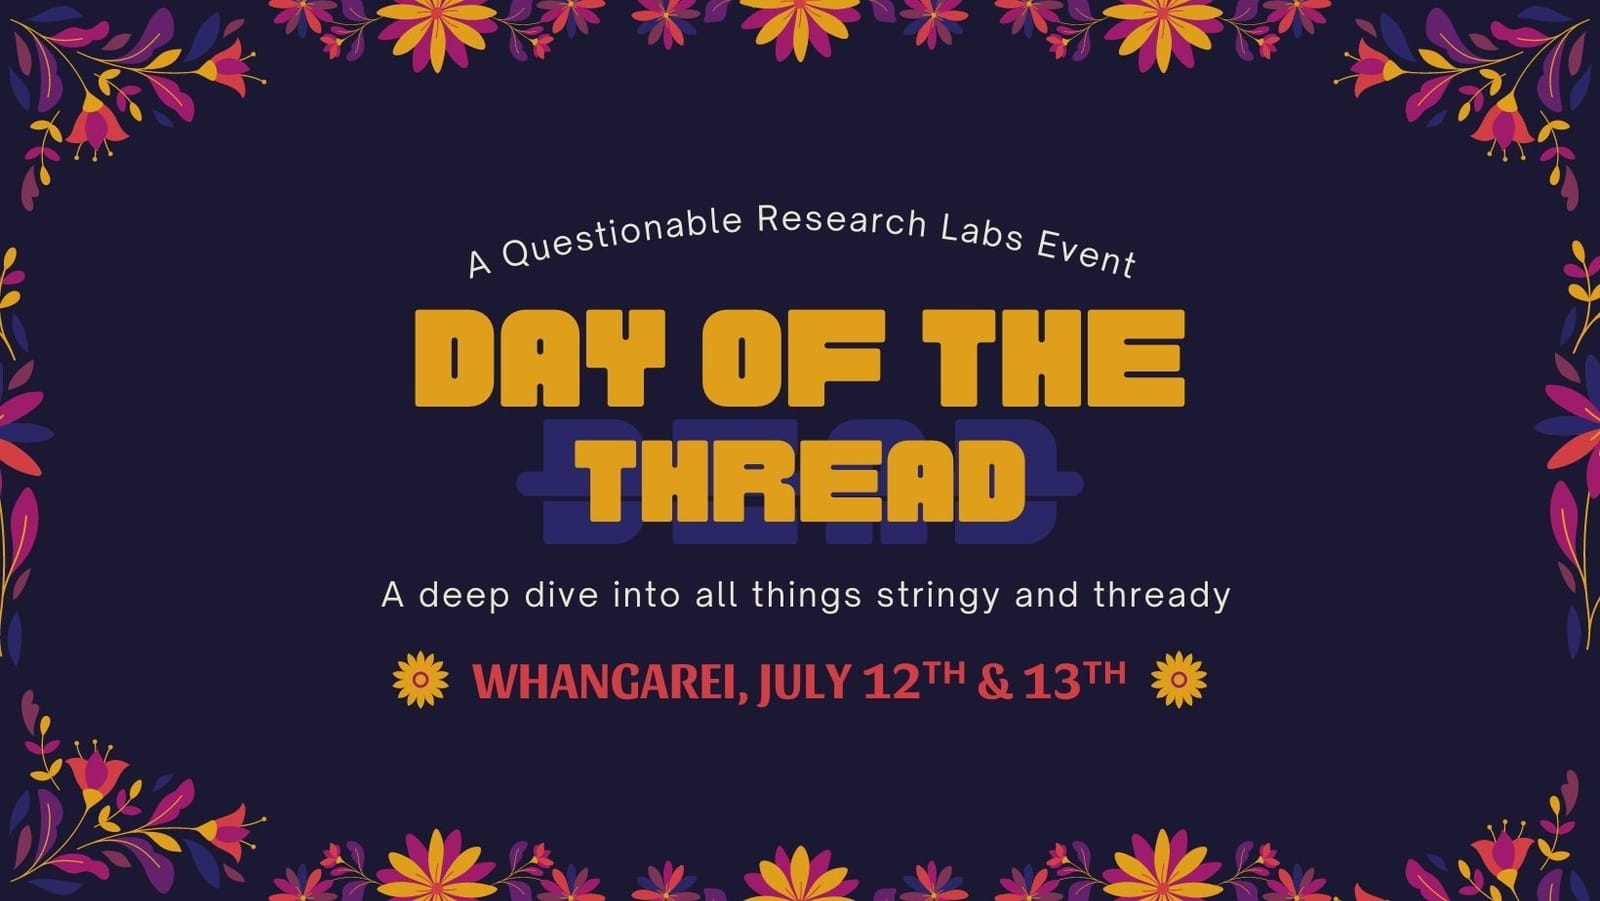 12th-13th July: Day of the Thread trip